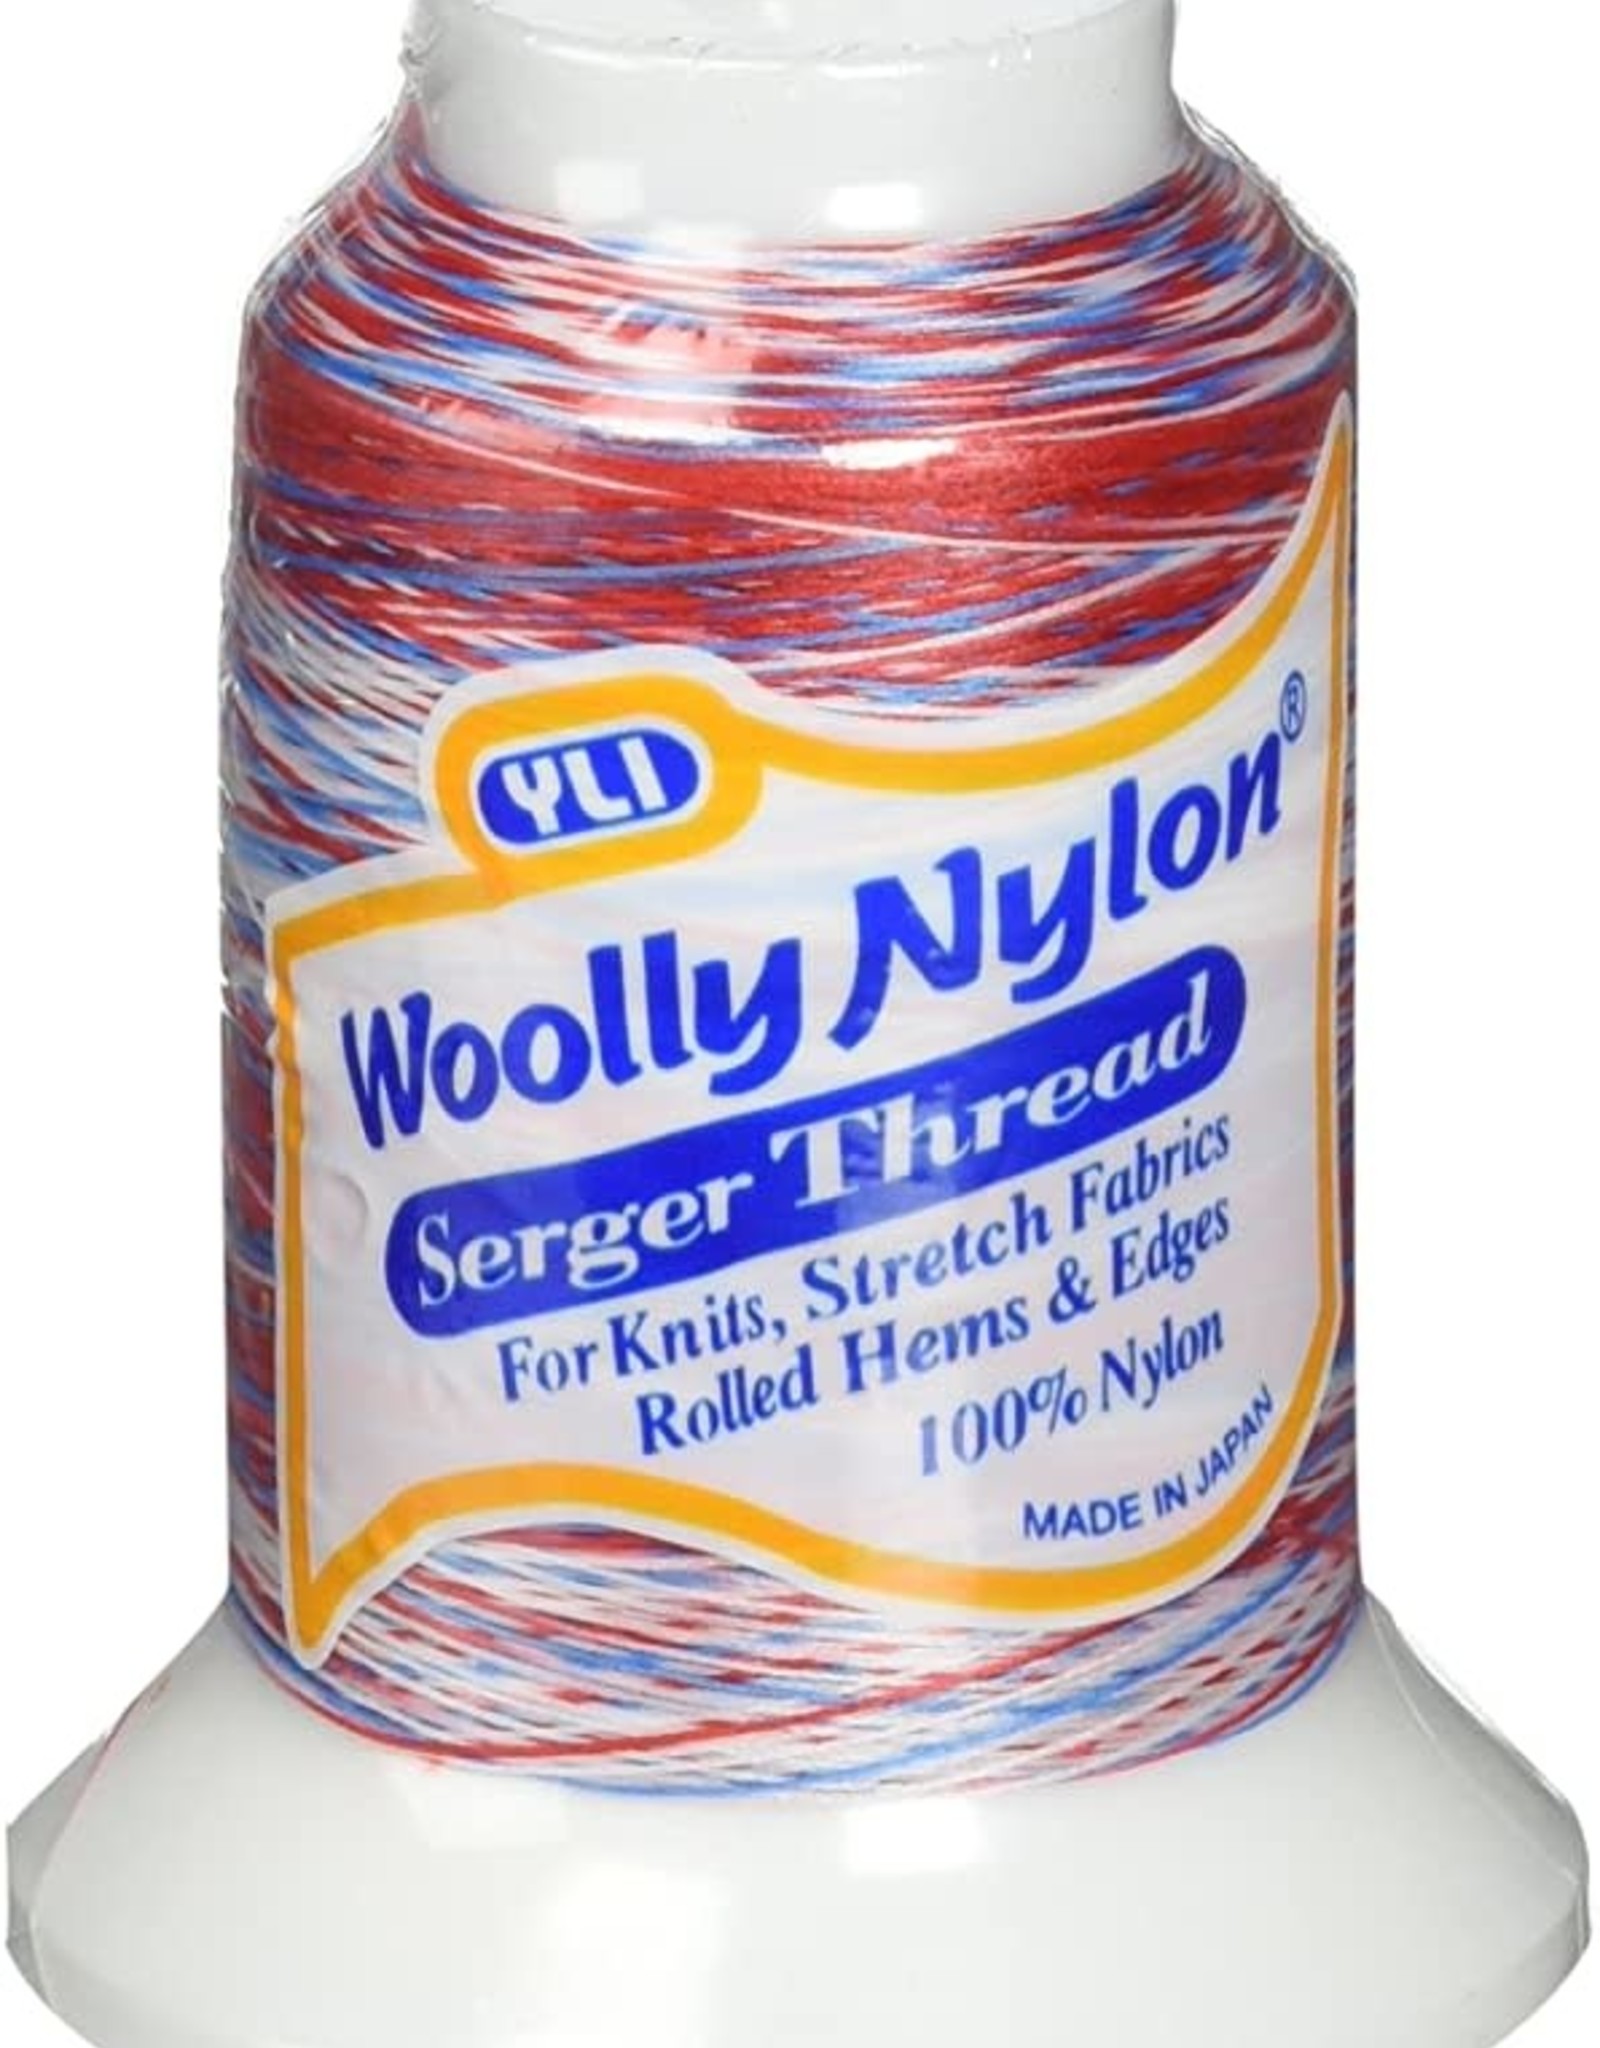 Wooly nylon variegated red